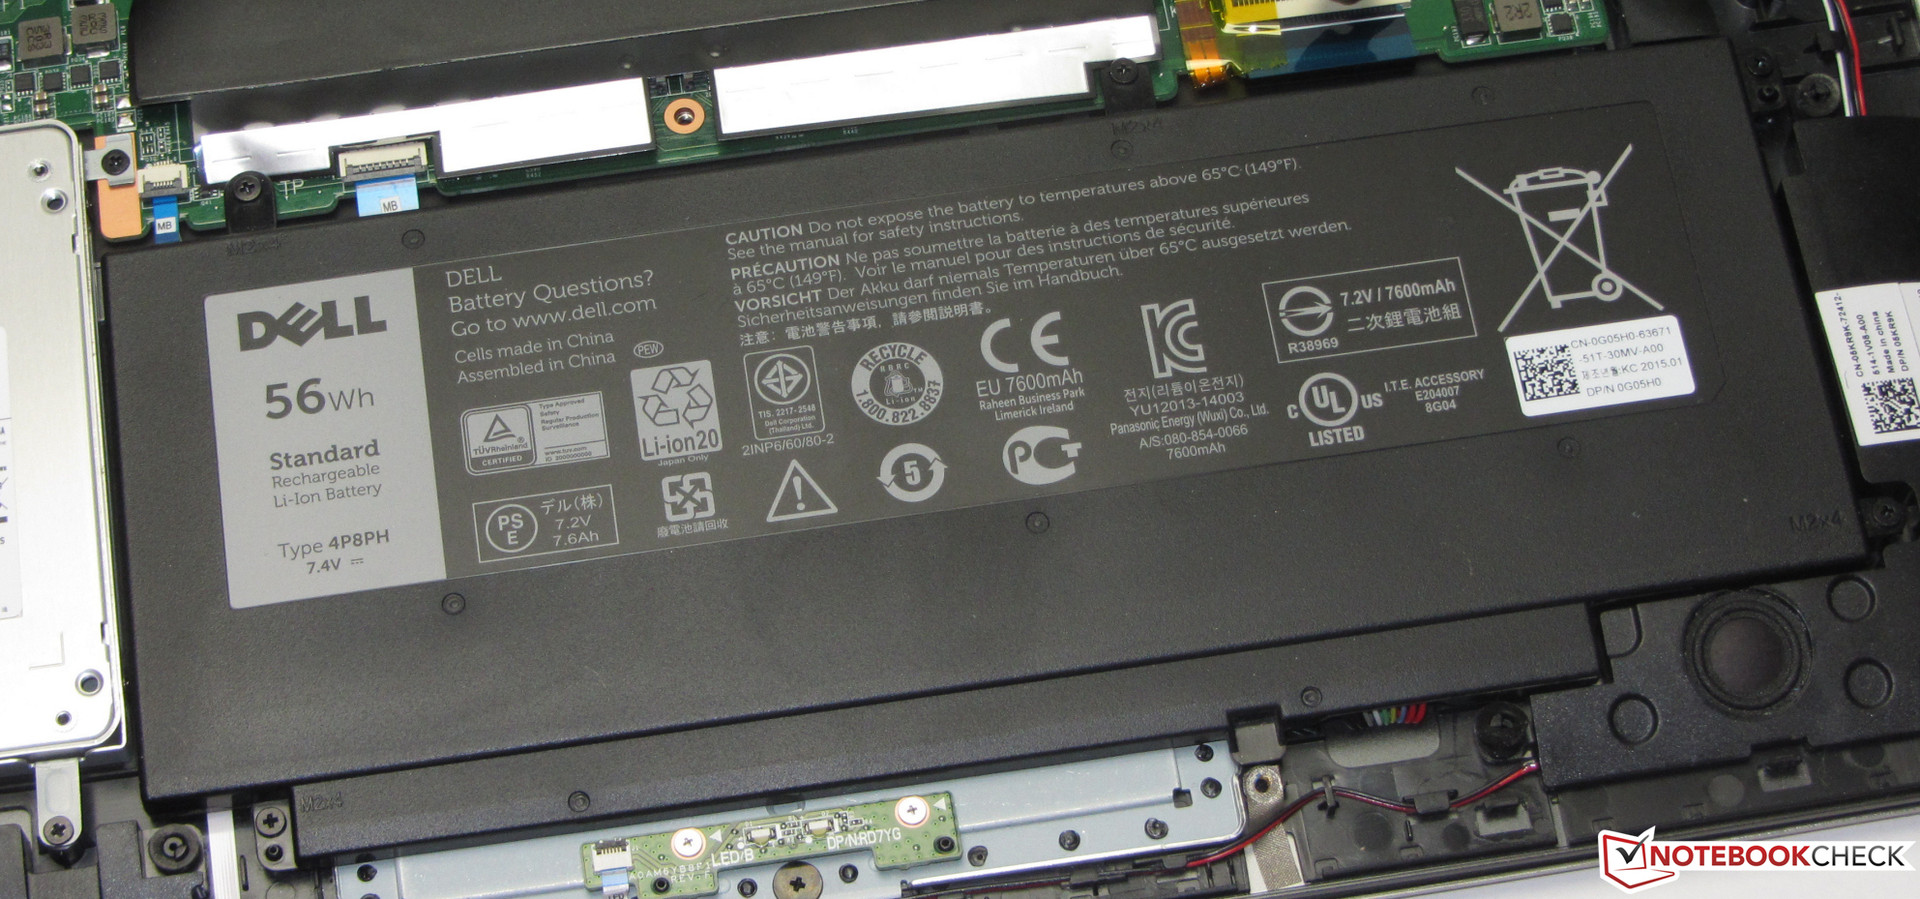 How do you get replacement manuals for Dell laptops?